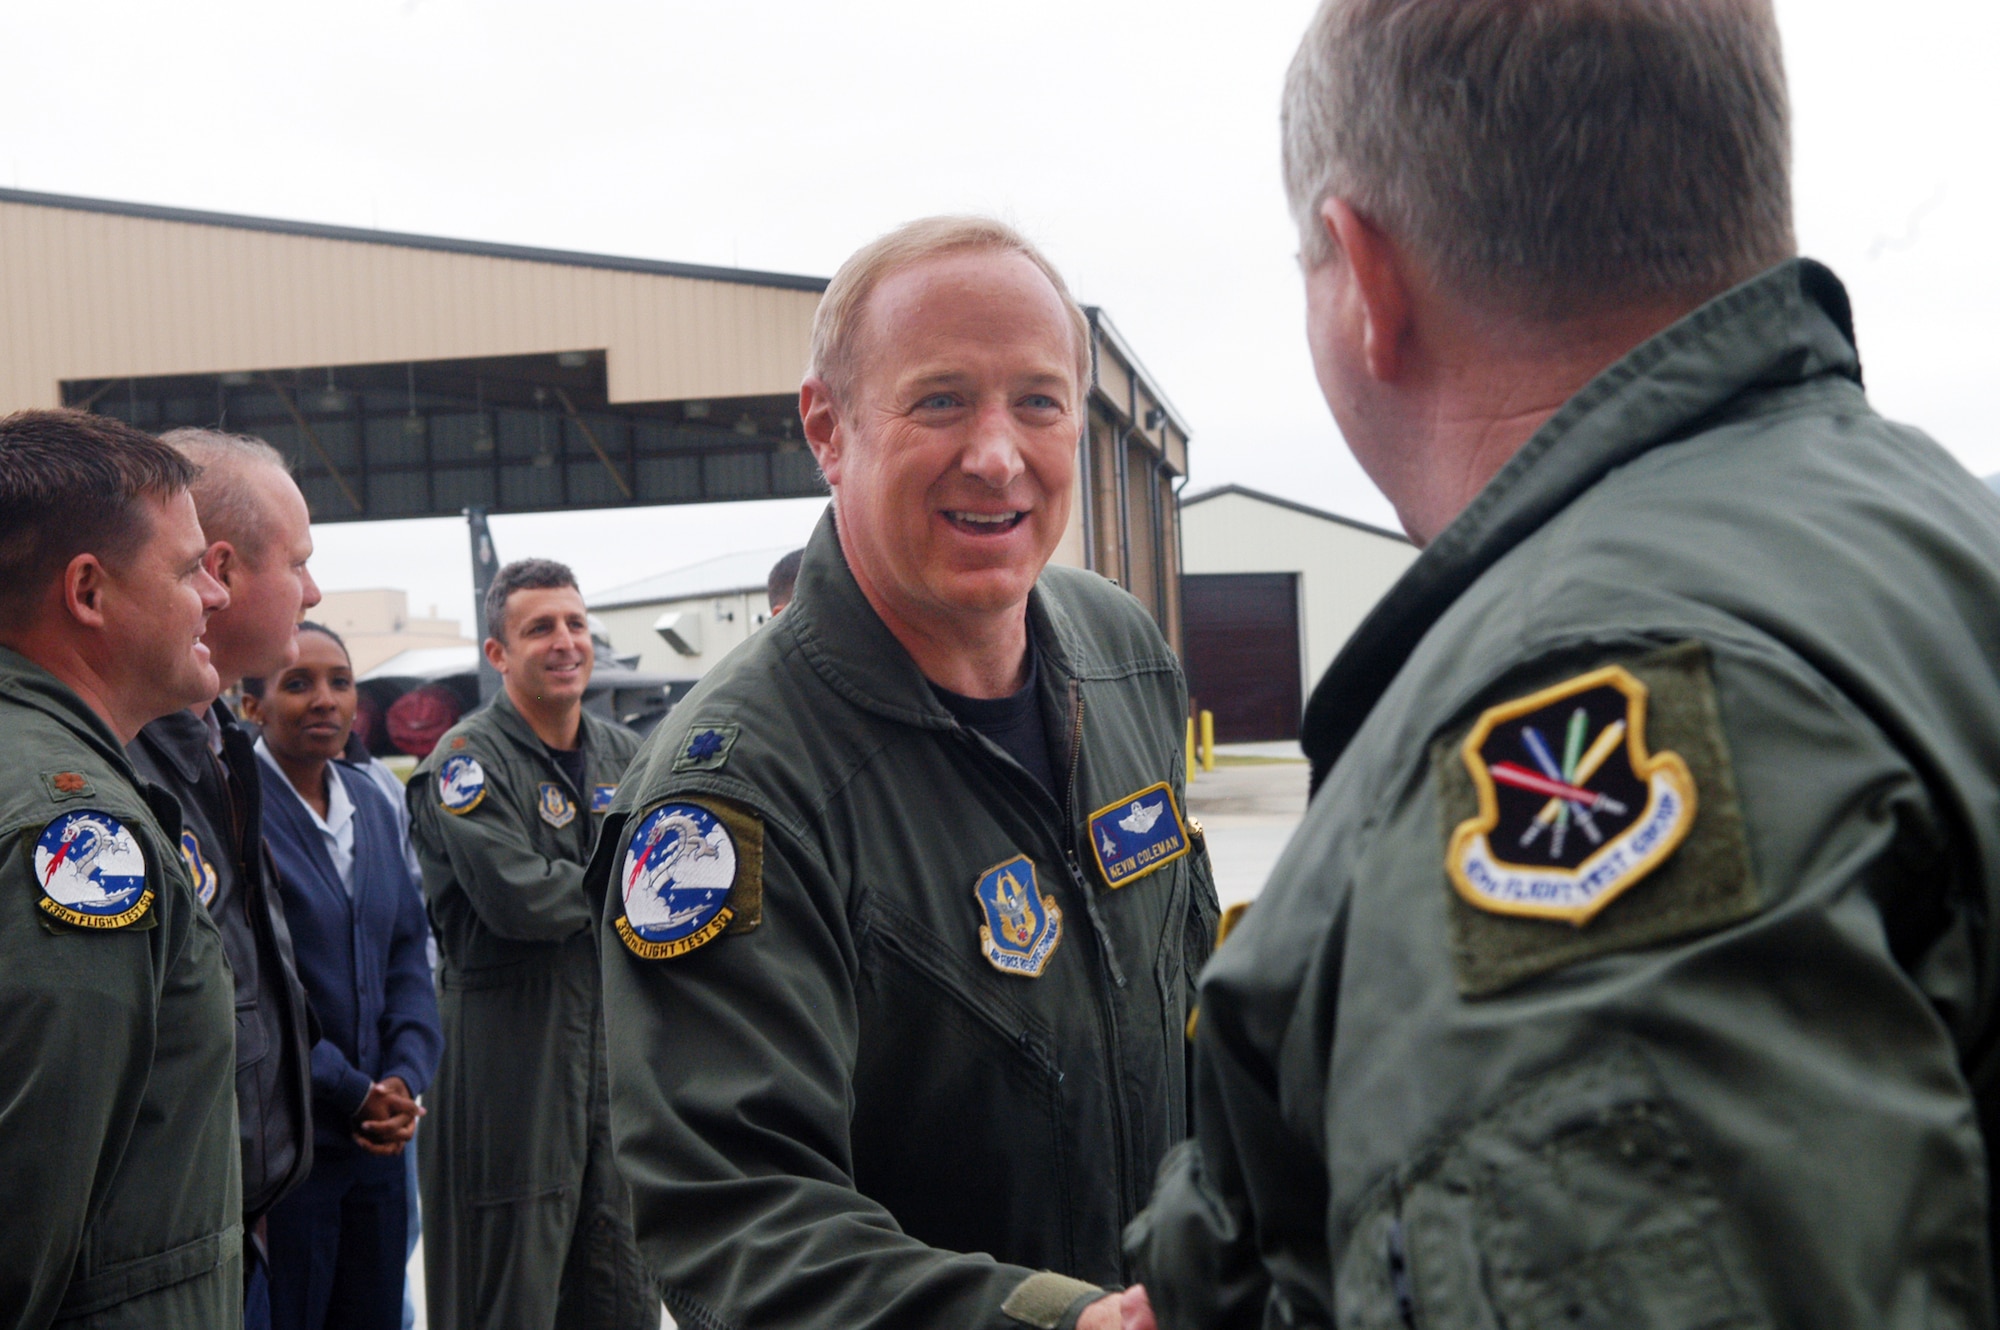 Lt. Col. Kevin Coleman is congratulated by co-workers after his final flight Nov. 23. U. S. Air Force photo by Sue Sapp